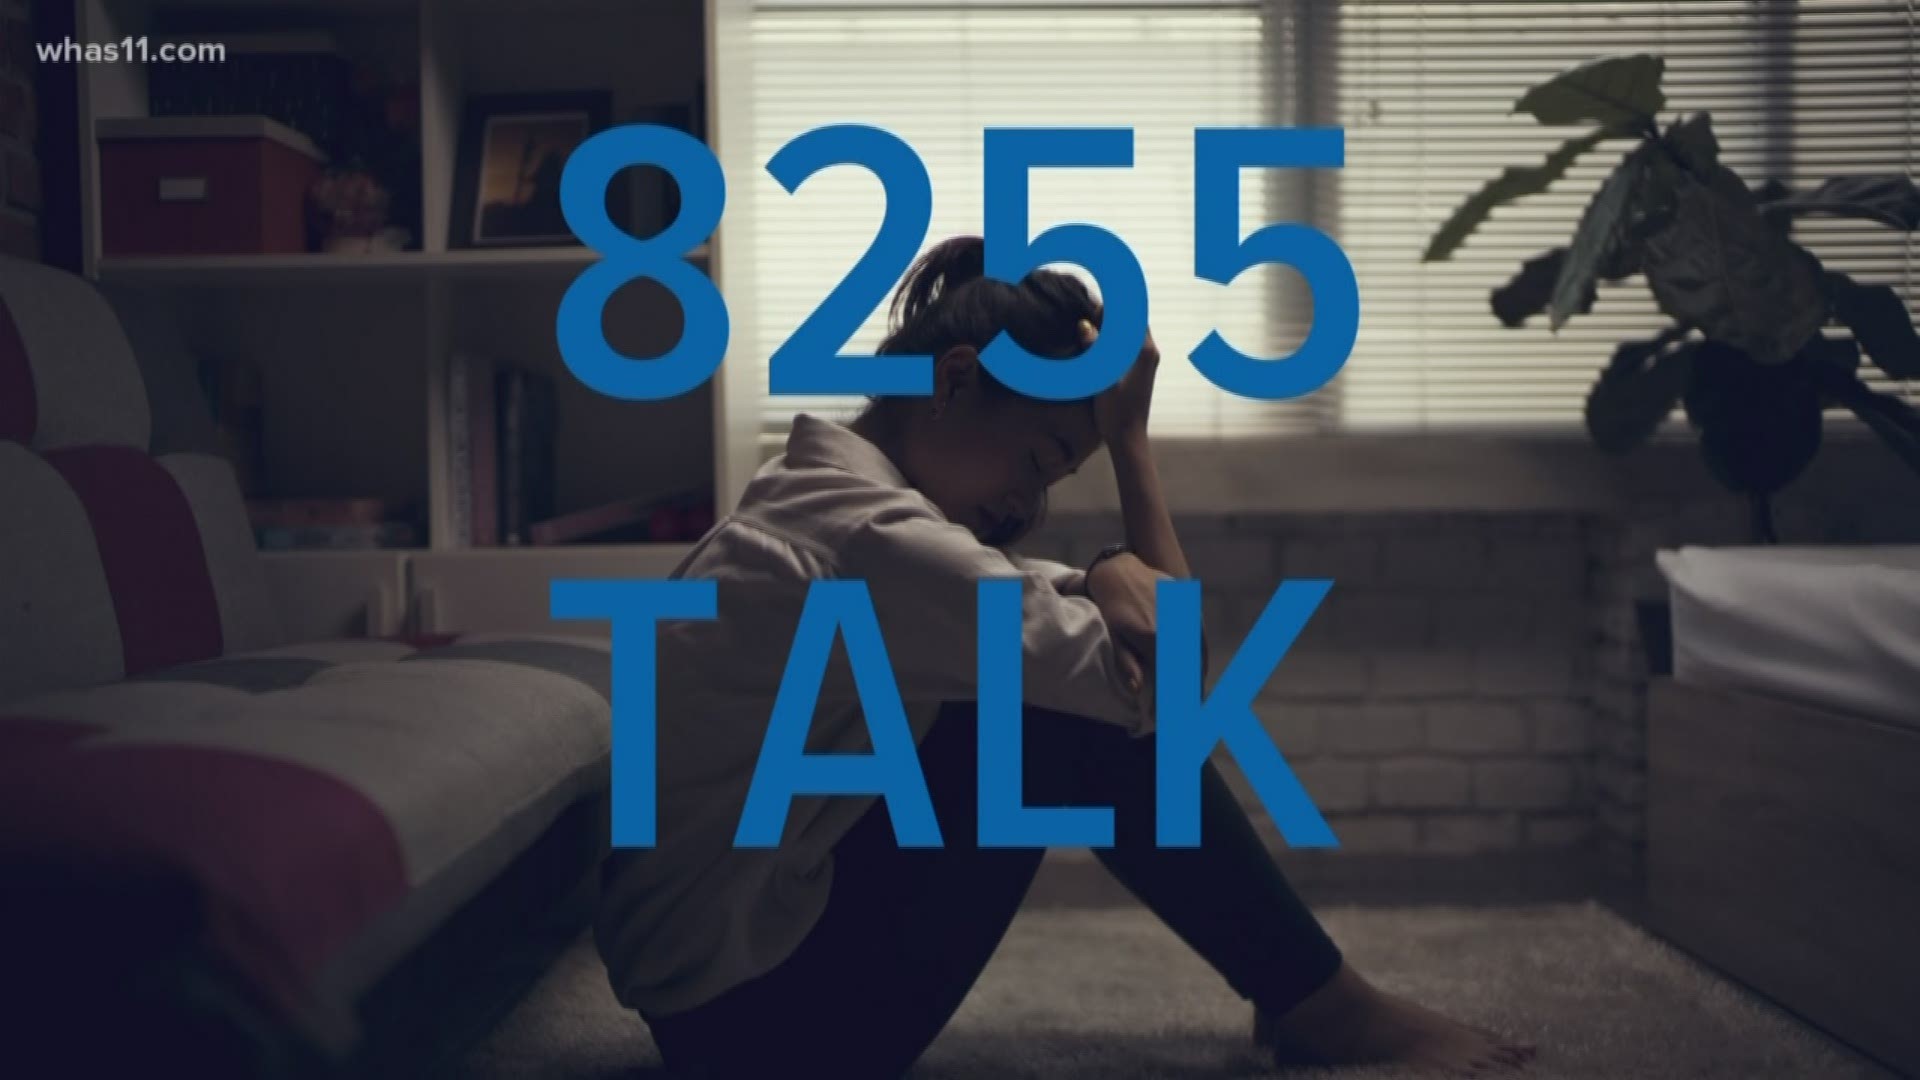 The number for the national suicide prevention and mental health crisis hotline system is 1-800-273-8255 with the last four spelling out talk. The FCC recommends the new number be 988.